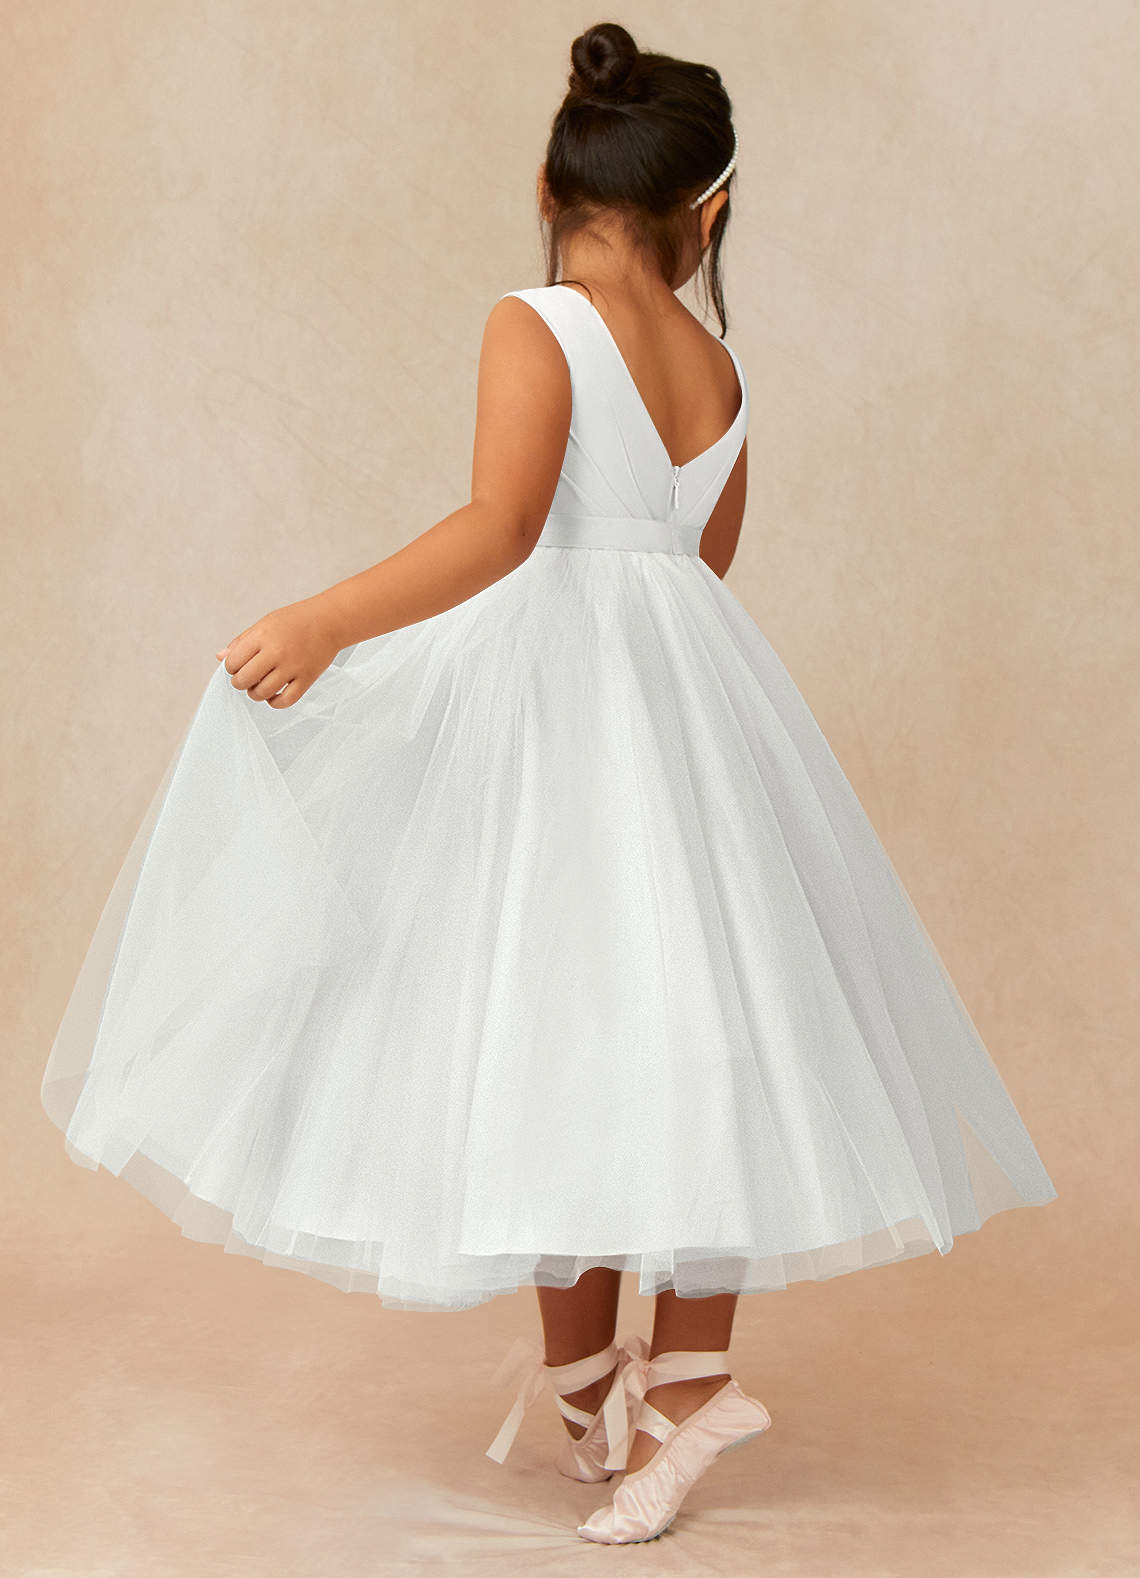 Azazie Bee Flower Girl Dresses Ball-Gown Pleated Tulle Ankle-Length Dress image1